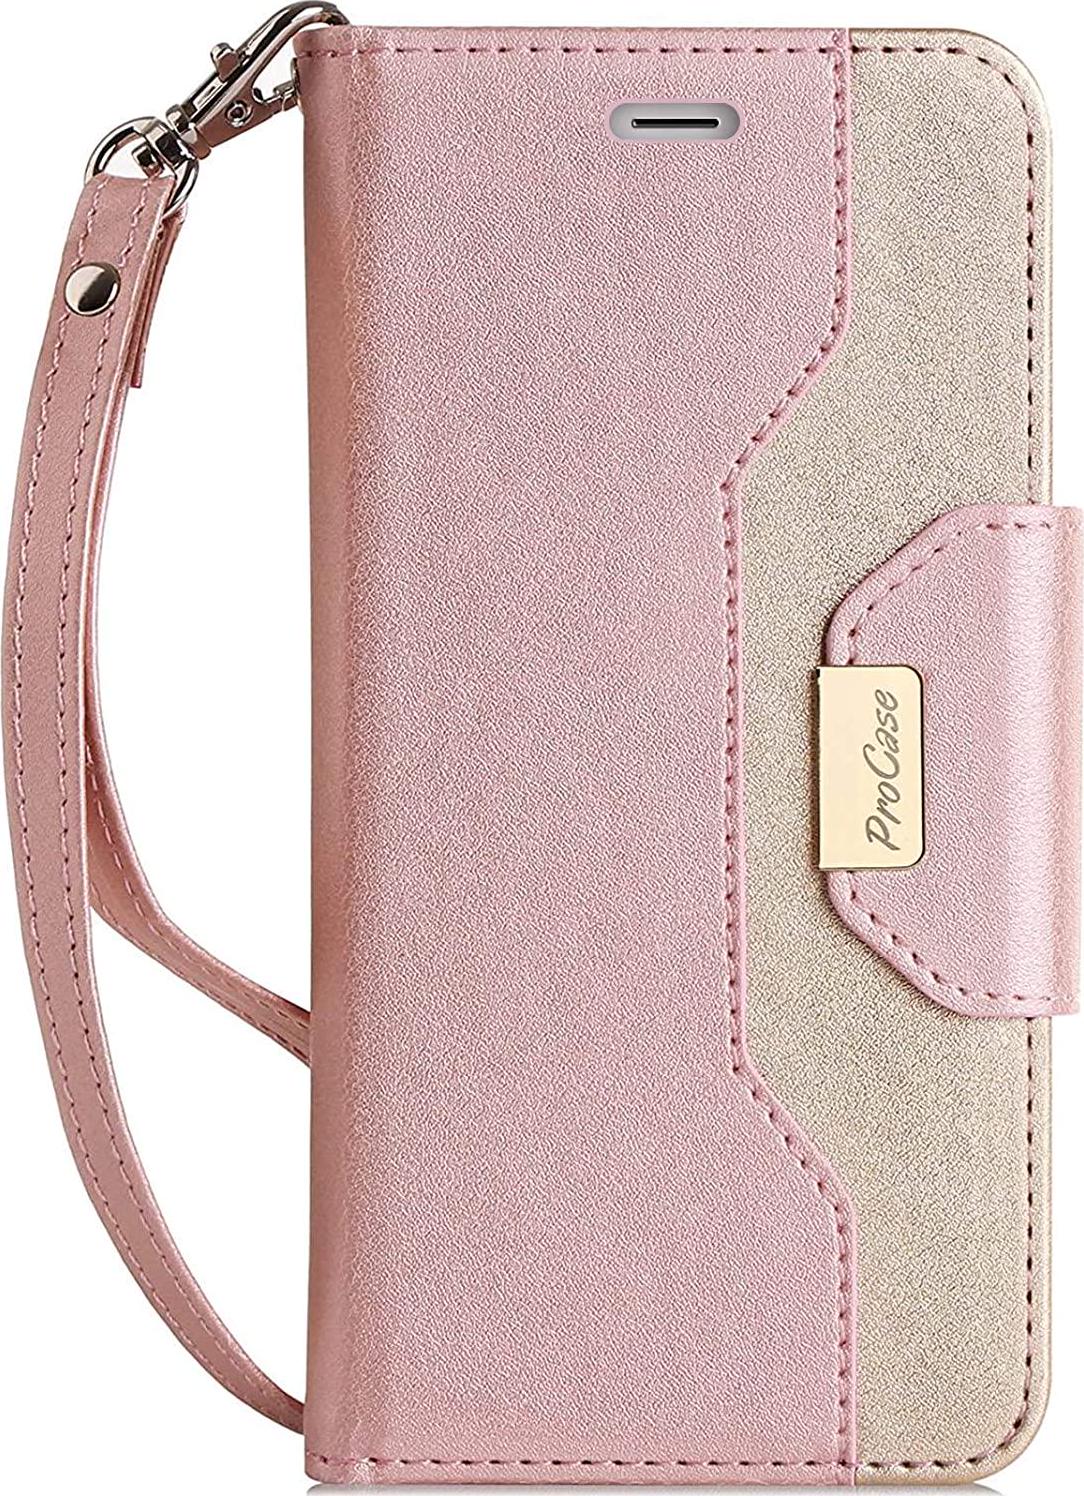 Procase, ProCase for iPhone SE 2020 / iPhone 7 / iPhone 8 Flip Case for Women Ladies Girls, Stylish Wallet Case with Card Holder Mirror Hand Strap-Pink